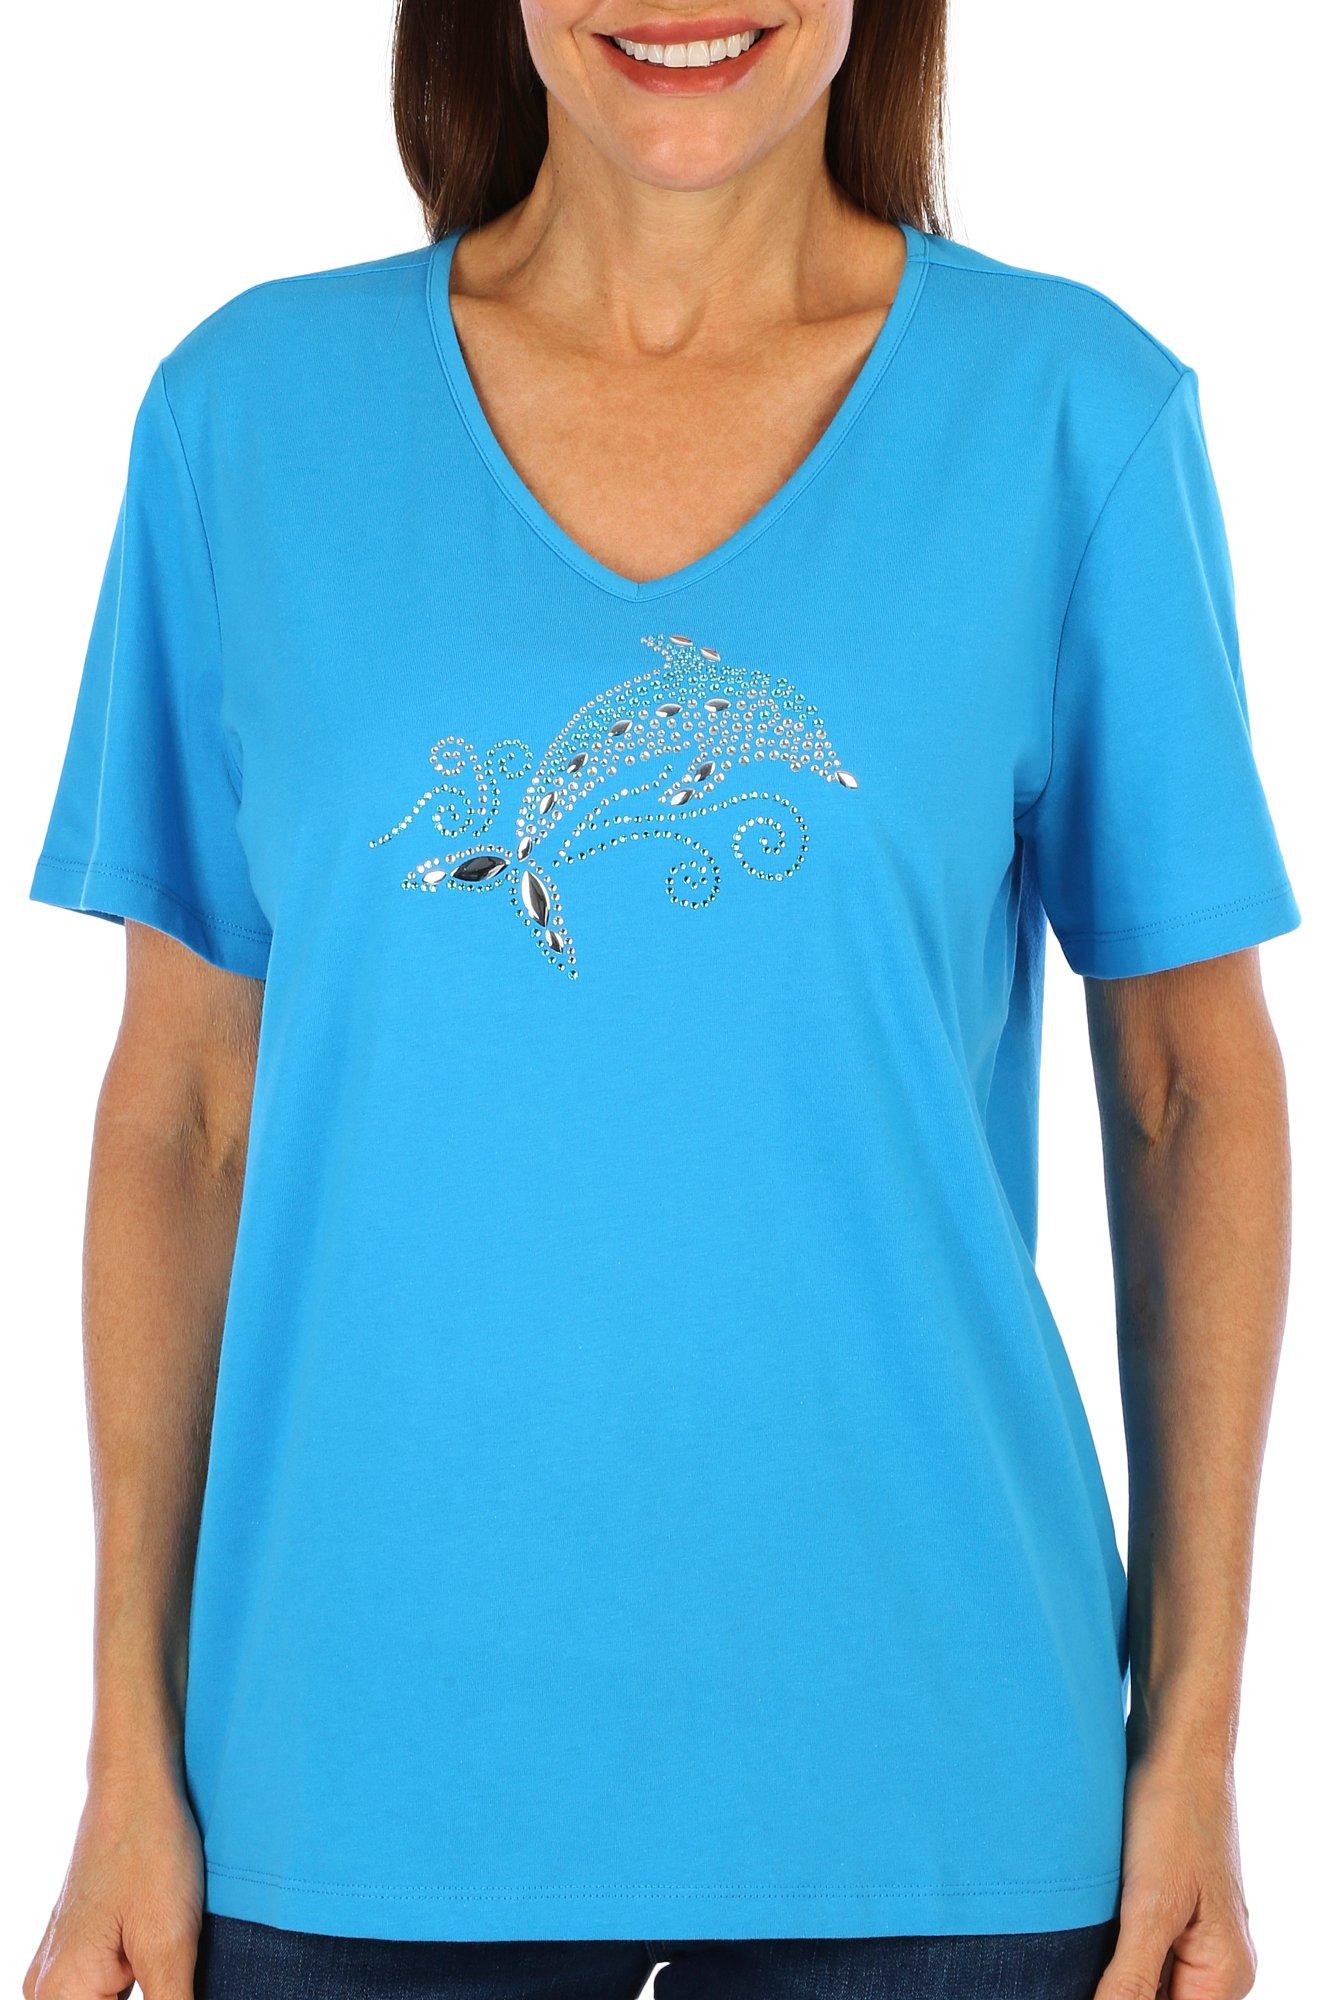 Coral Bay Womens Jeweled Dolphin Short Sleeve Top